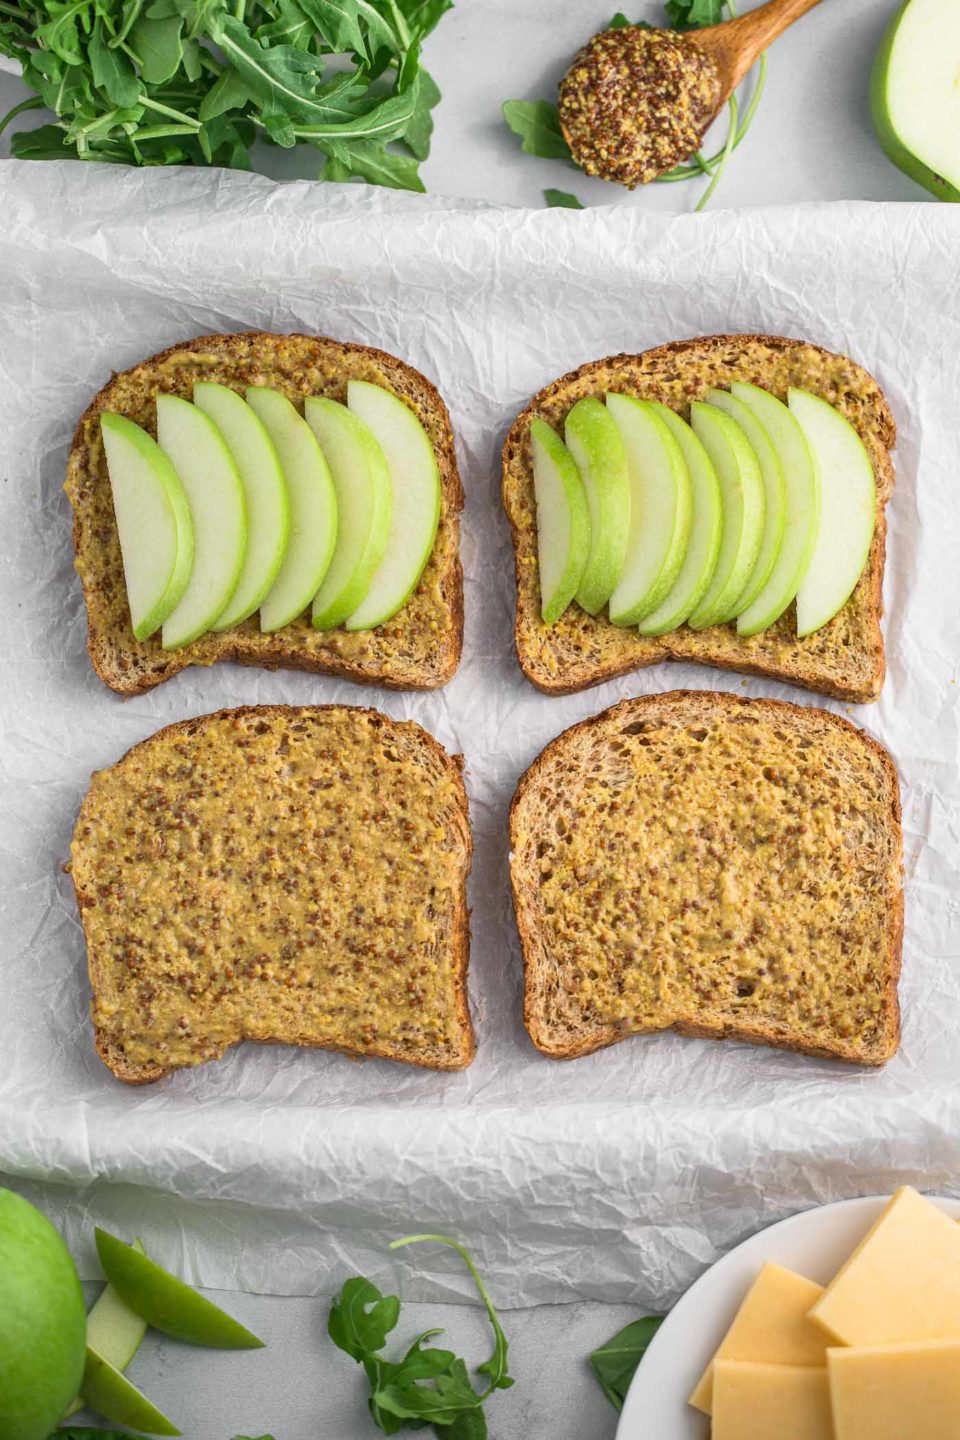 autumn grilled cheese sandwiches stuffed with fall flavor! hearty whole-grain bread slathered in whole grain mustard & sandwiched around melty gouda, smoked turkey, & crisp granny smith apples. the only thing missing is a big dunk into a bowl of tomato soup! #playswellwithbutter #comfortfood #grilledcheese #grannysmith